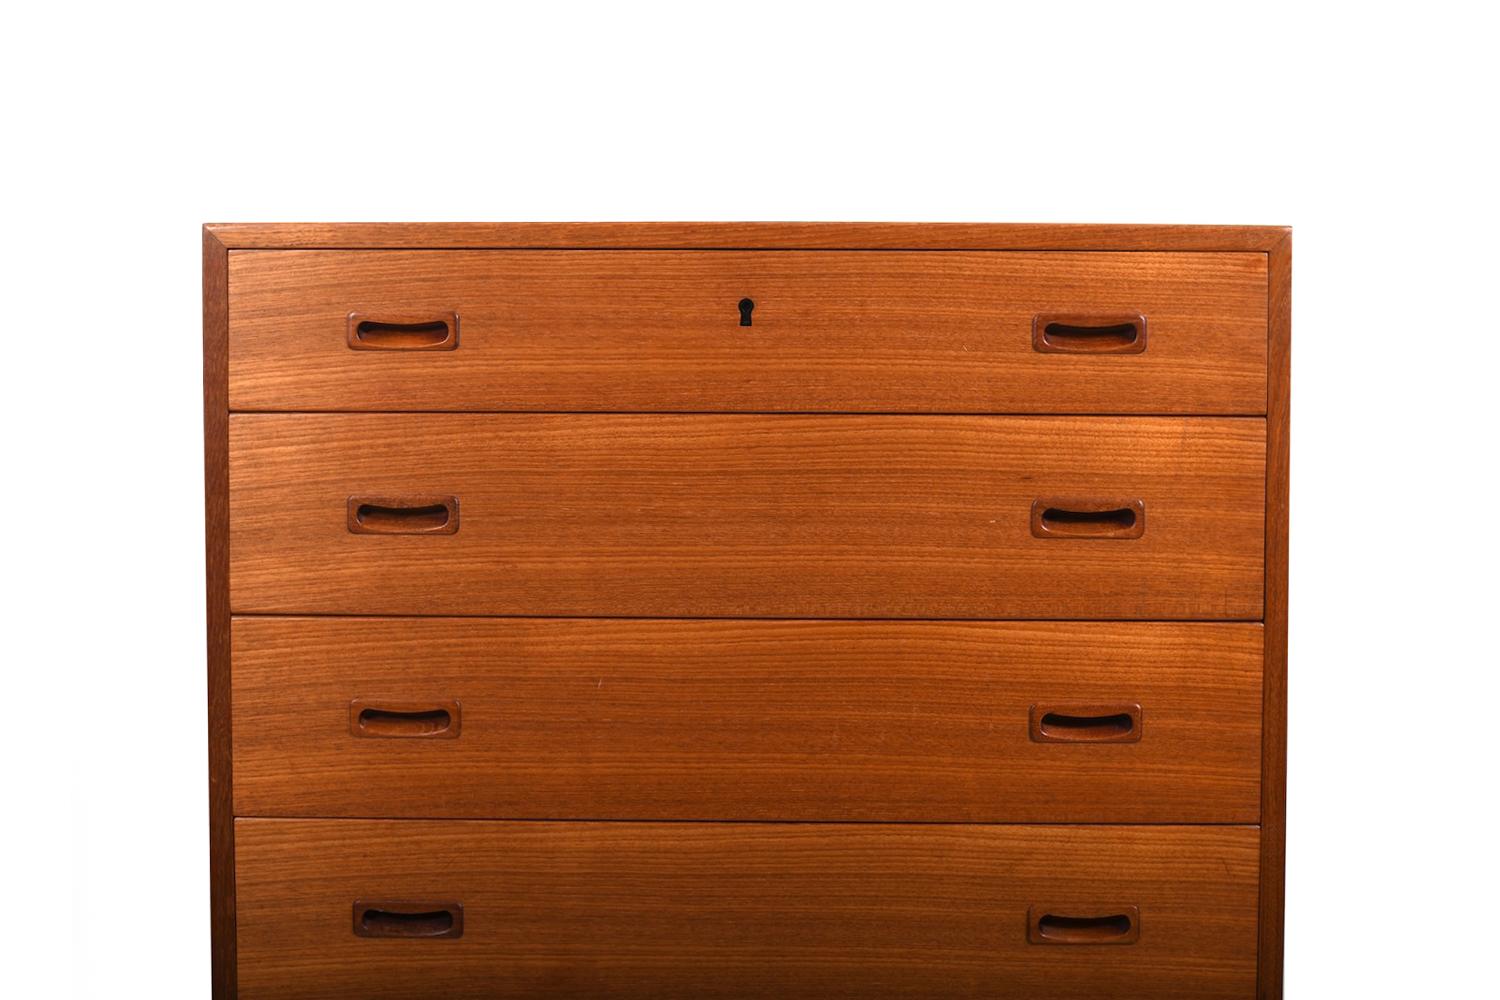 Danish Tallboy Chest of Drawers in Teak by Omann Jun. 1960s. For Sale